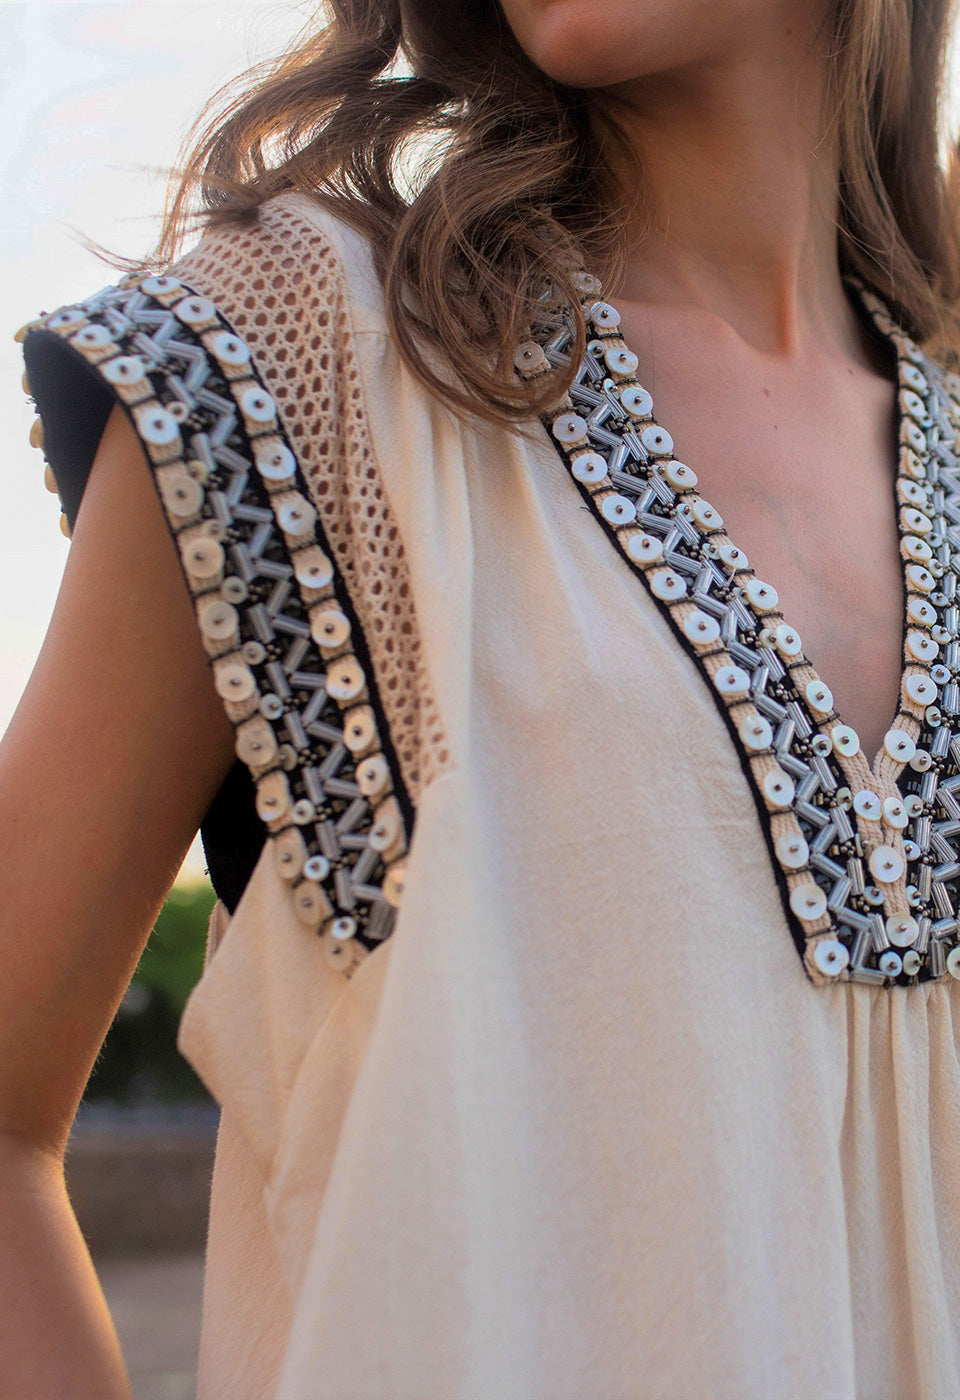 MOTHER OF PEARLS TOP